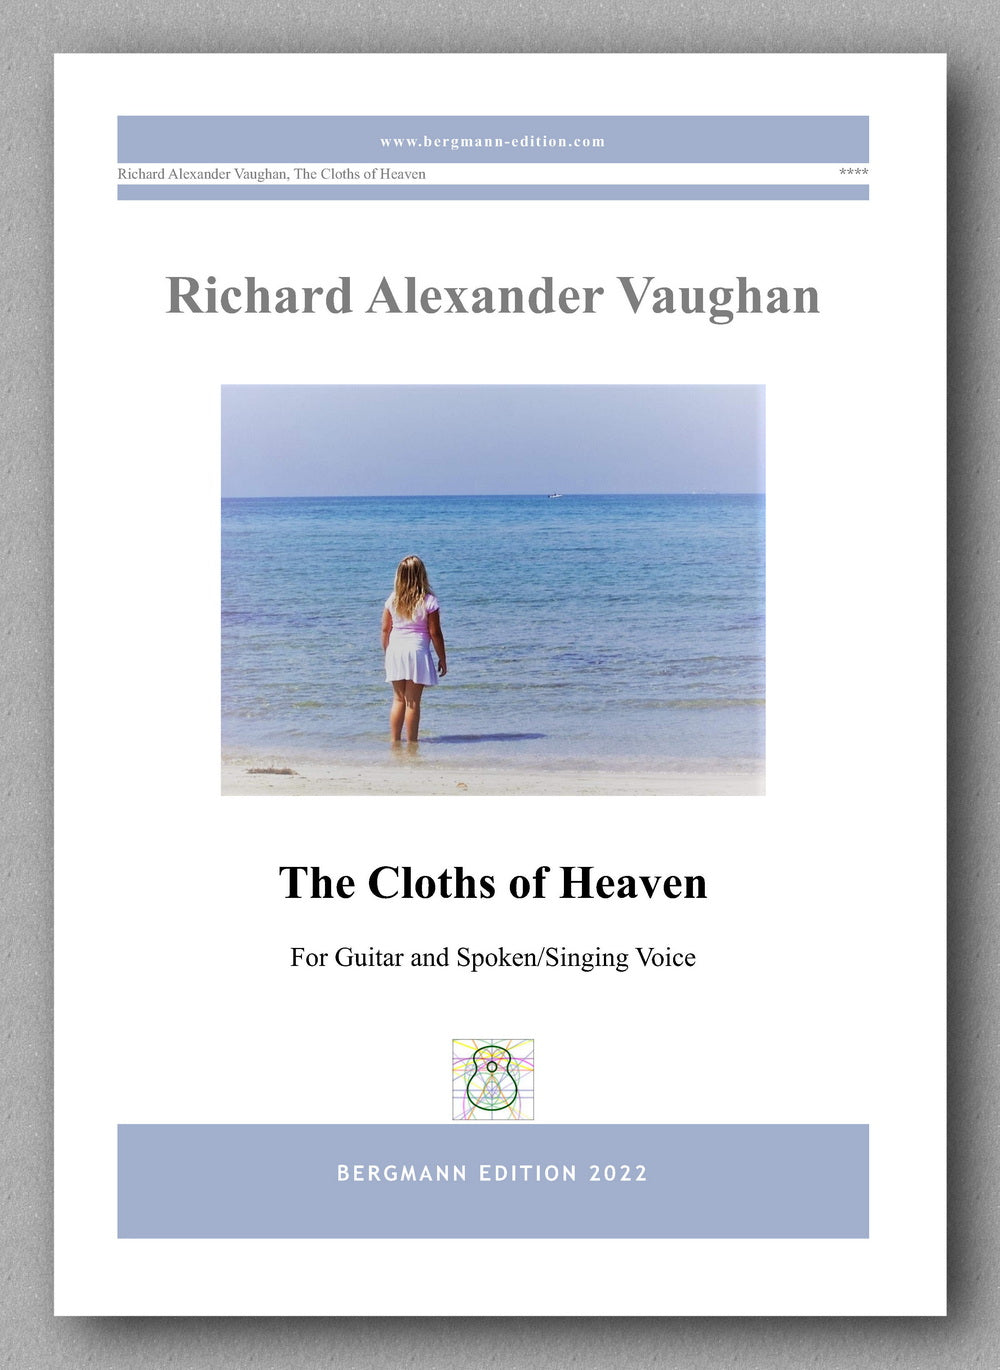 The Cloths of Heaven by Richard Vaughan - preview of the cover